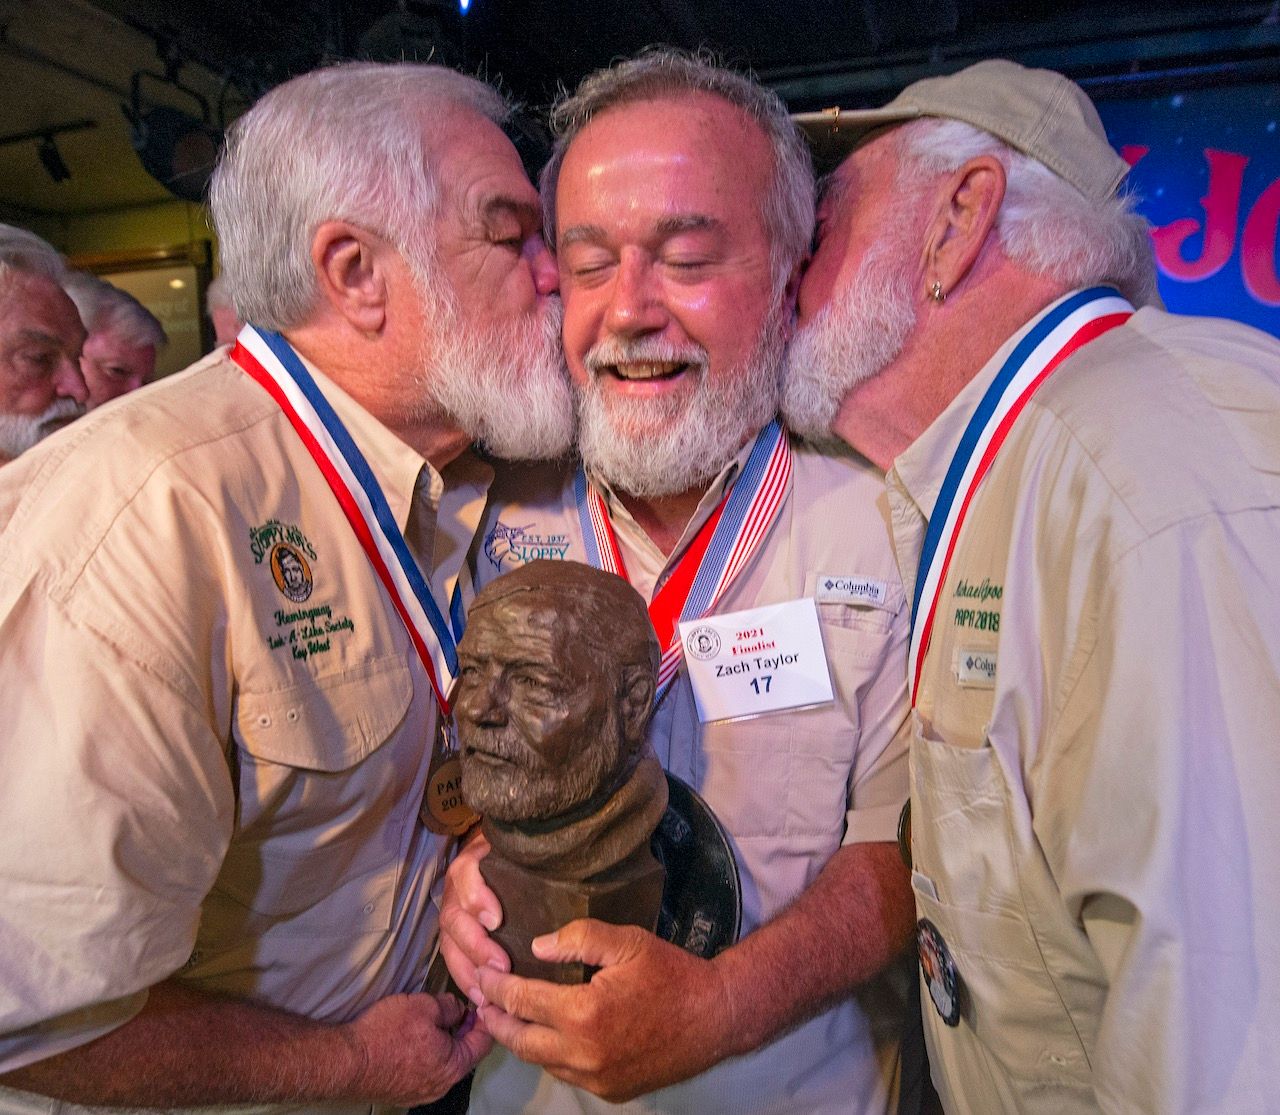 As many as 150 burly, bearded contestants are expected to compete in the annual Hemingway® Look-Alike Contest at Sloppy Joe’s Bar.